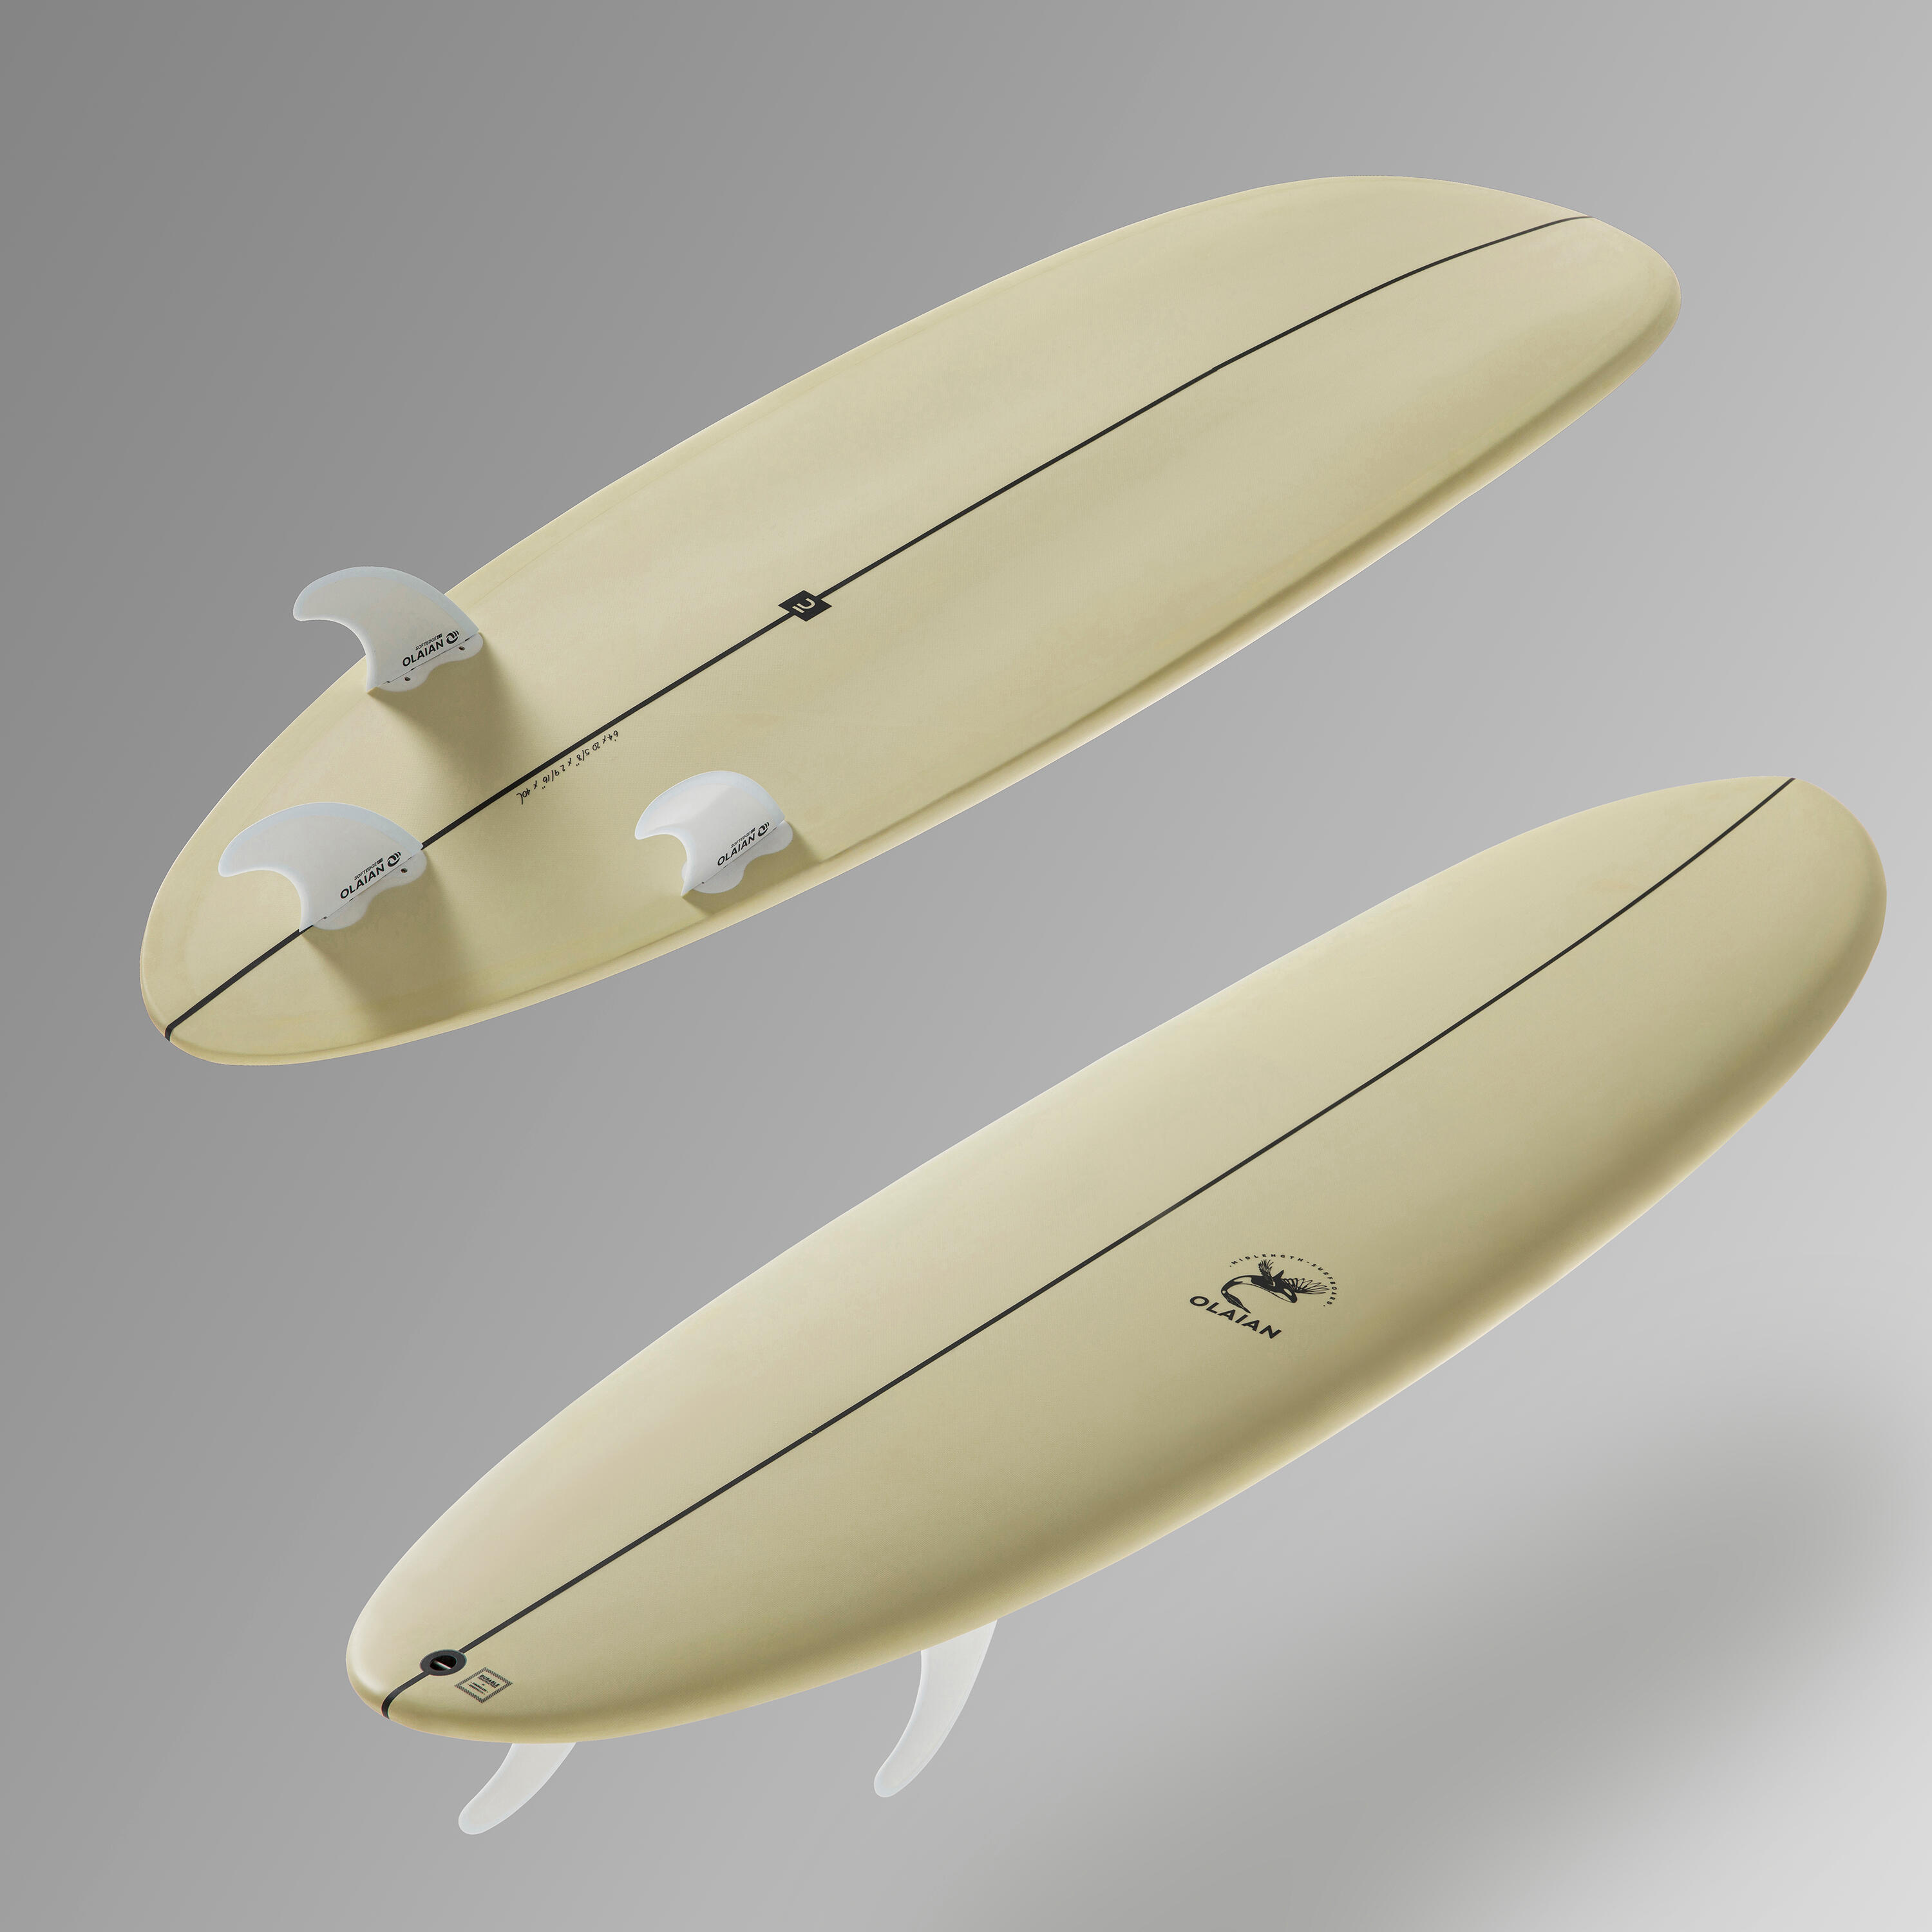 SURF 500 Hybrid 6'4", complete with 3 fins. 6/14